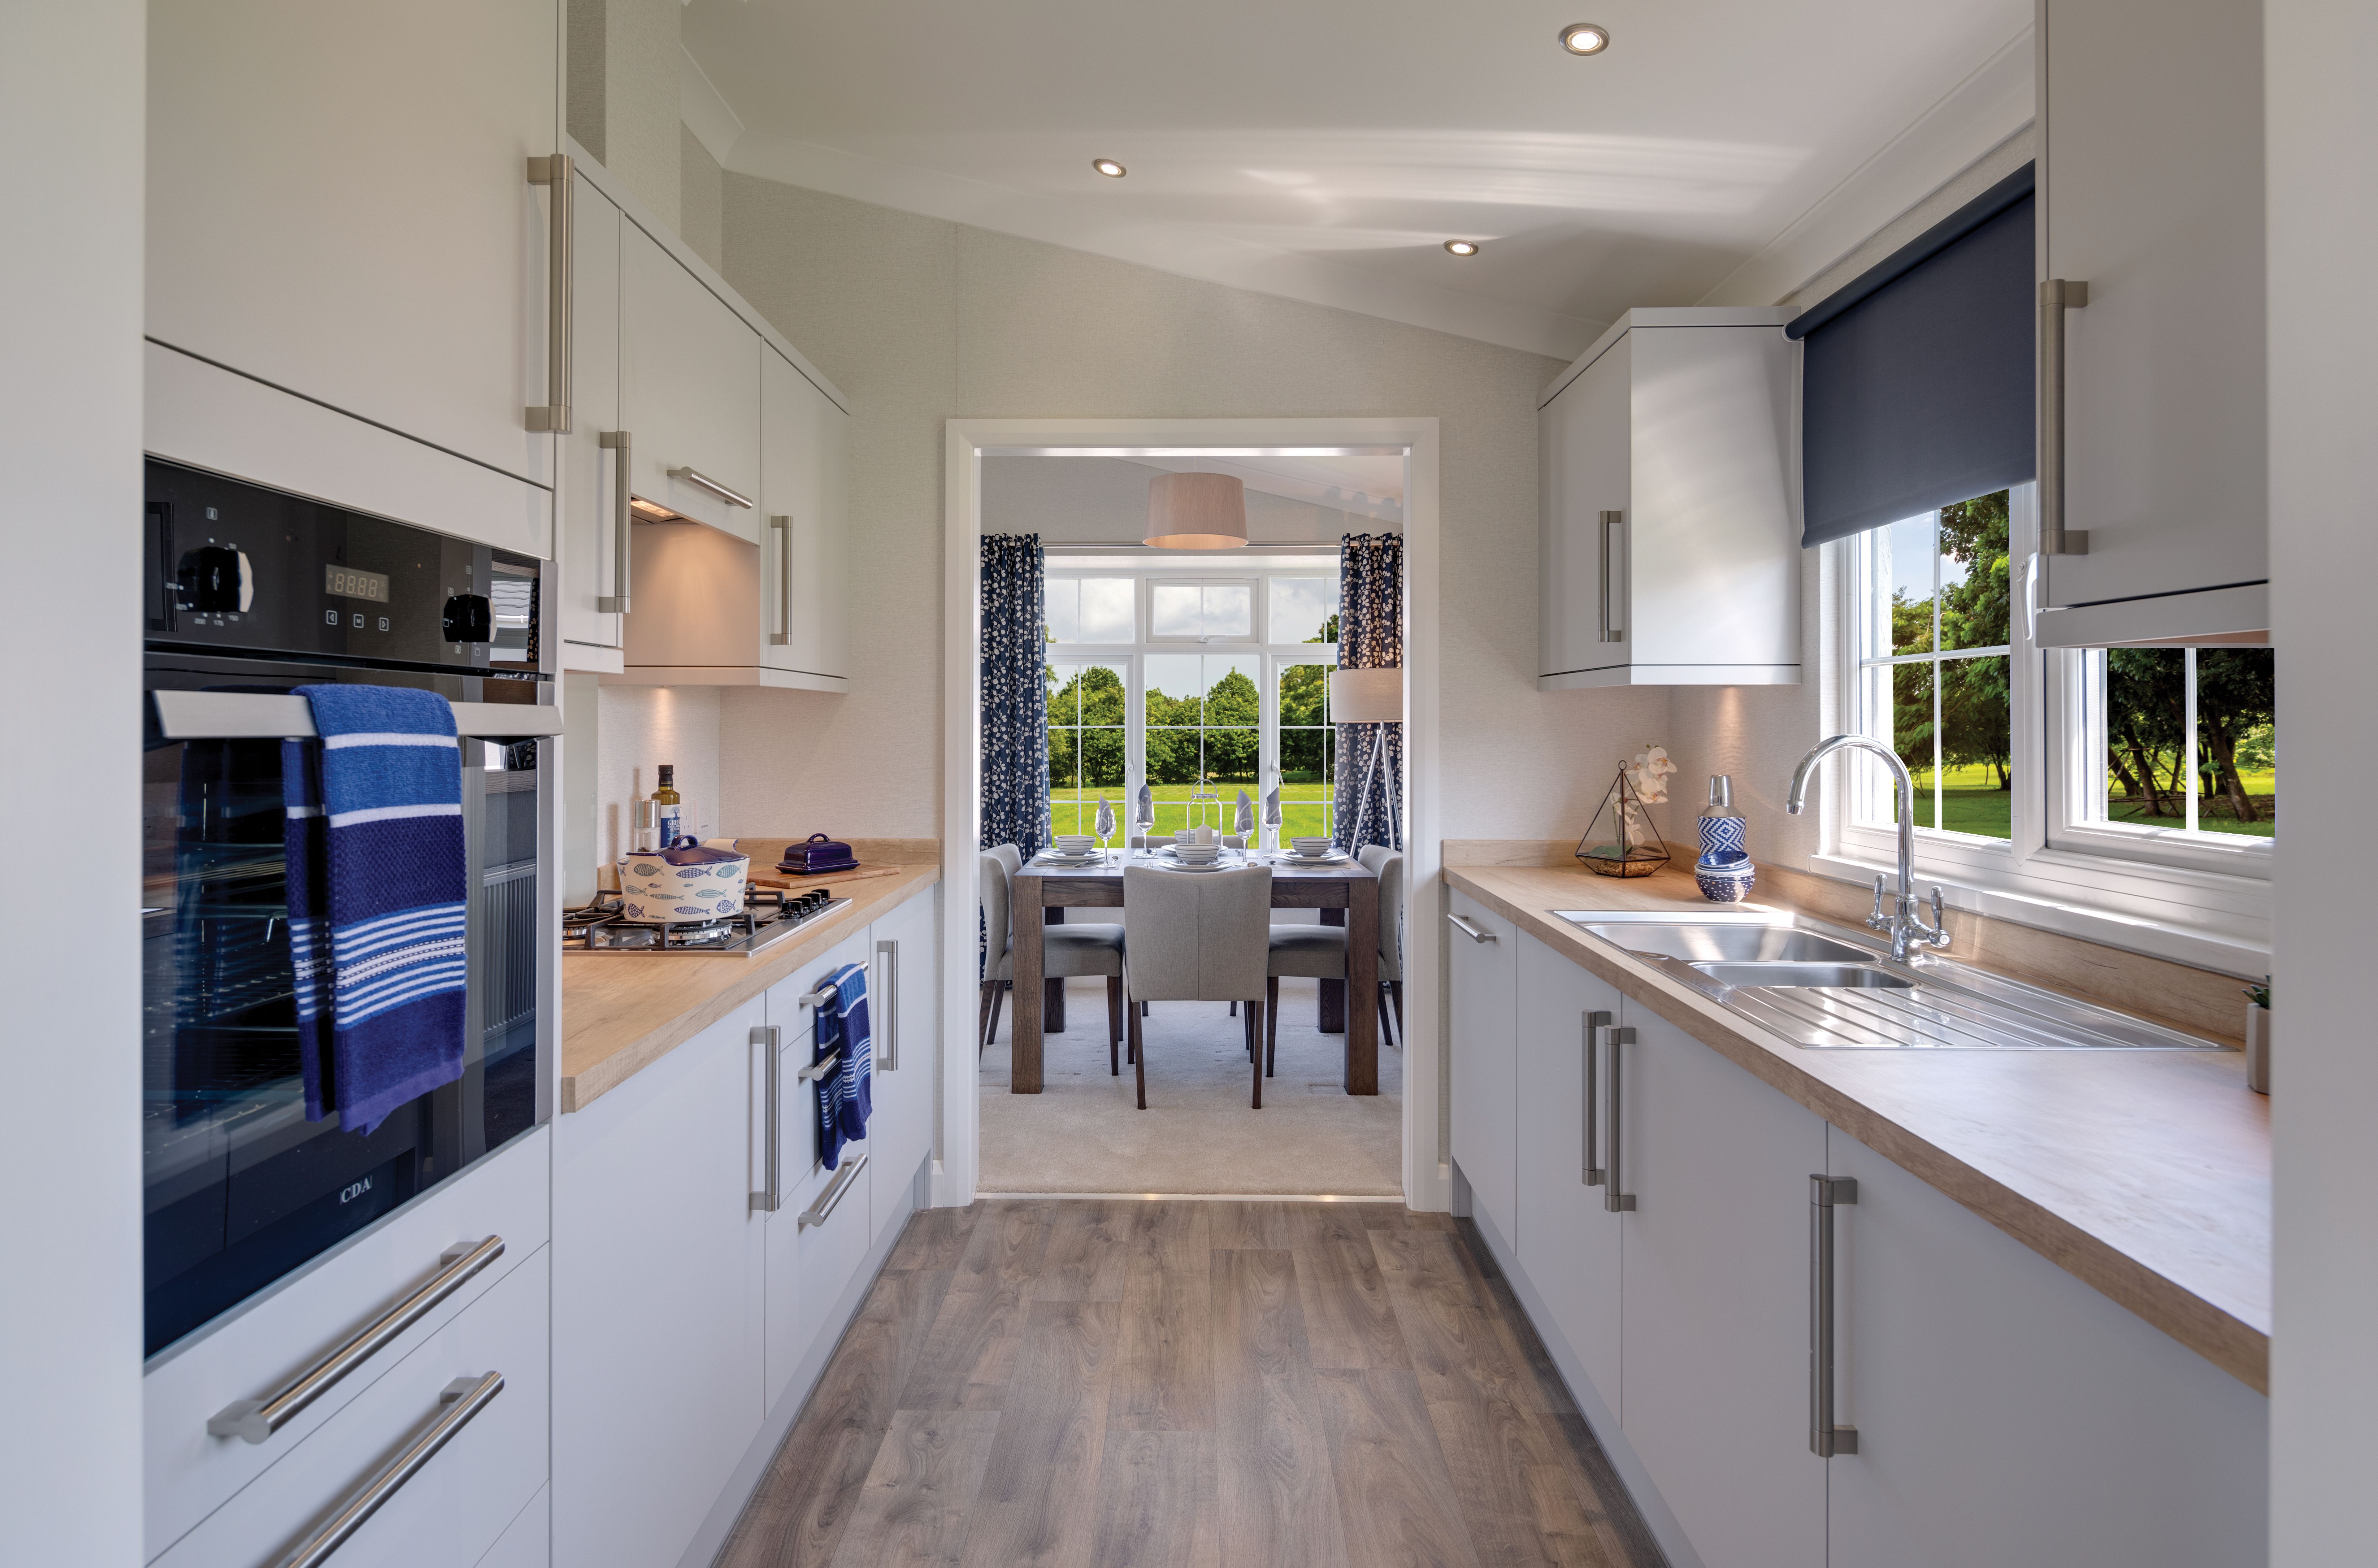 The Charnwood Willerby Bespoke park home kitchen